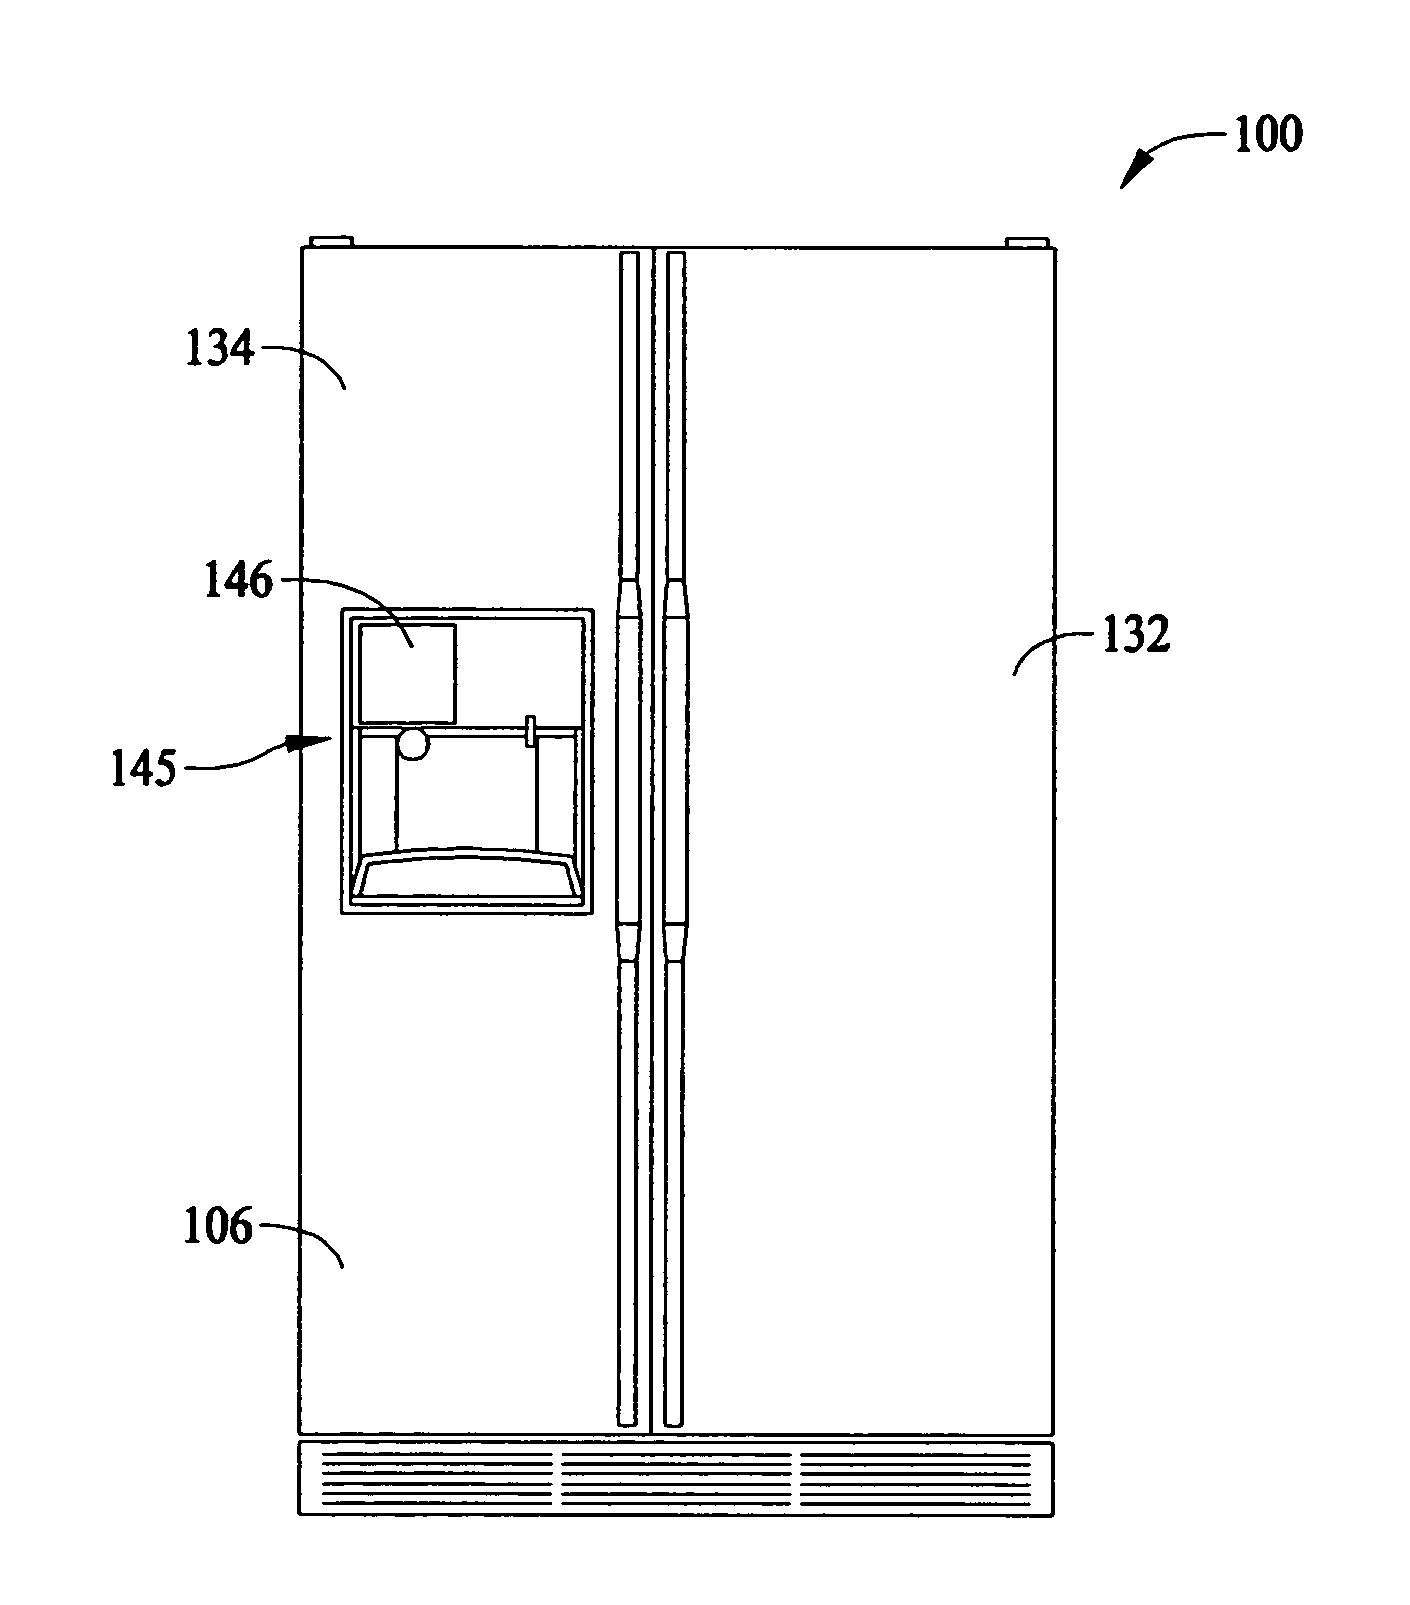 Apparatus and method for controlling odor within an appliance